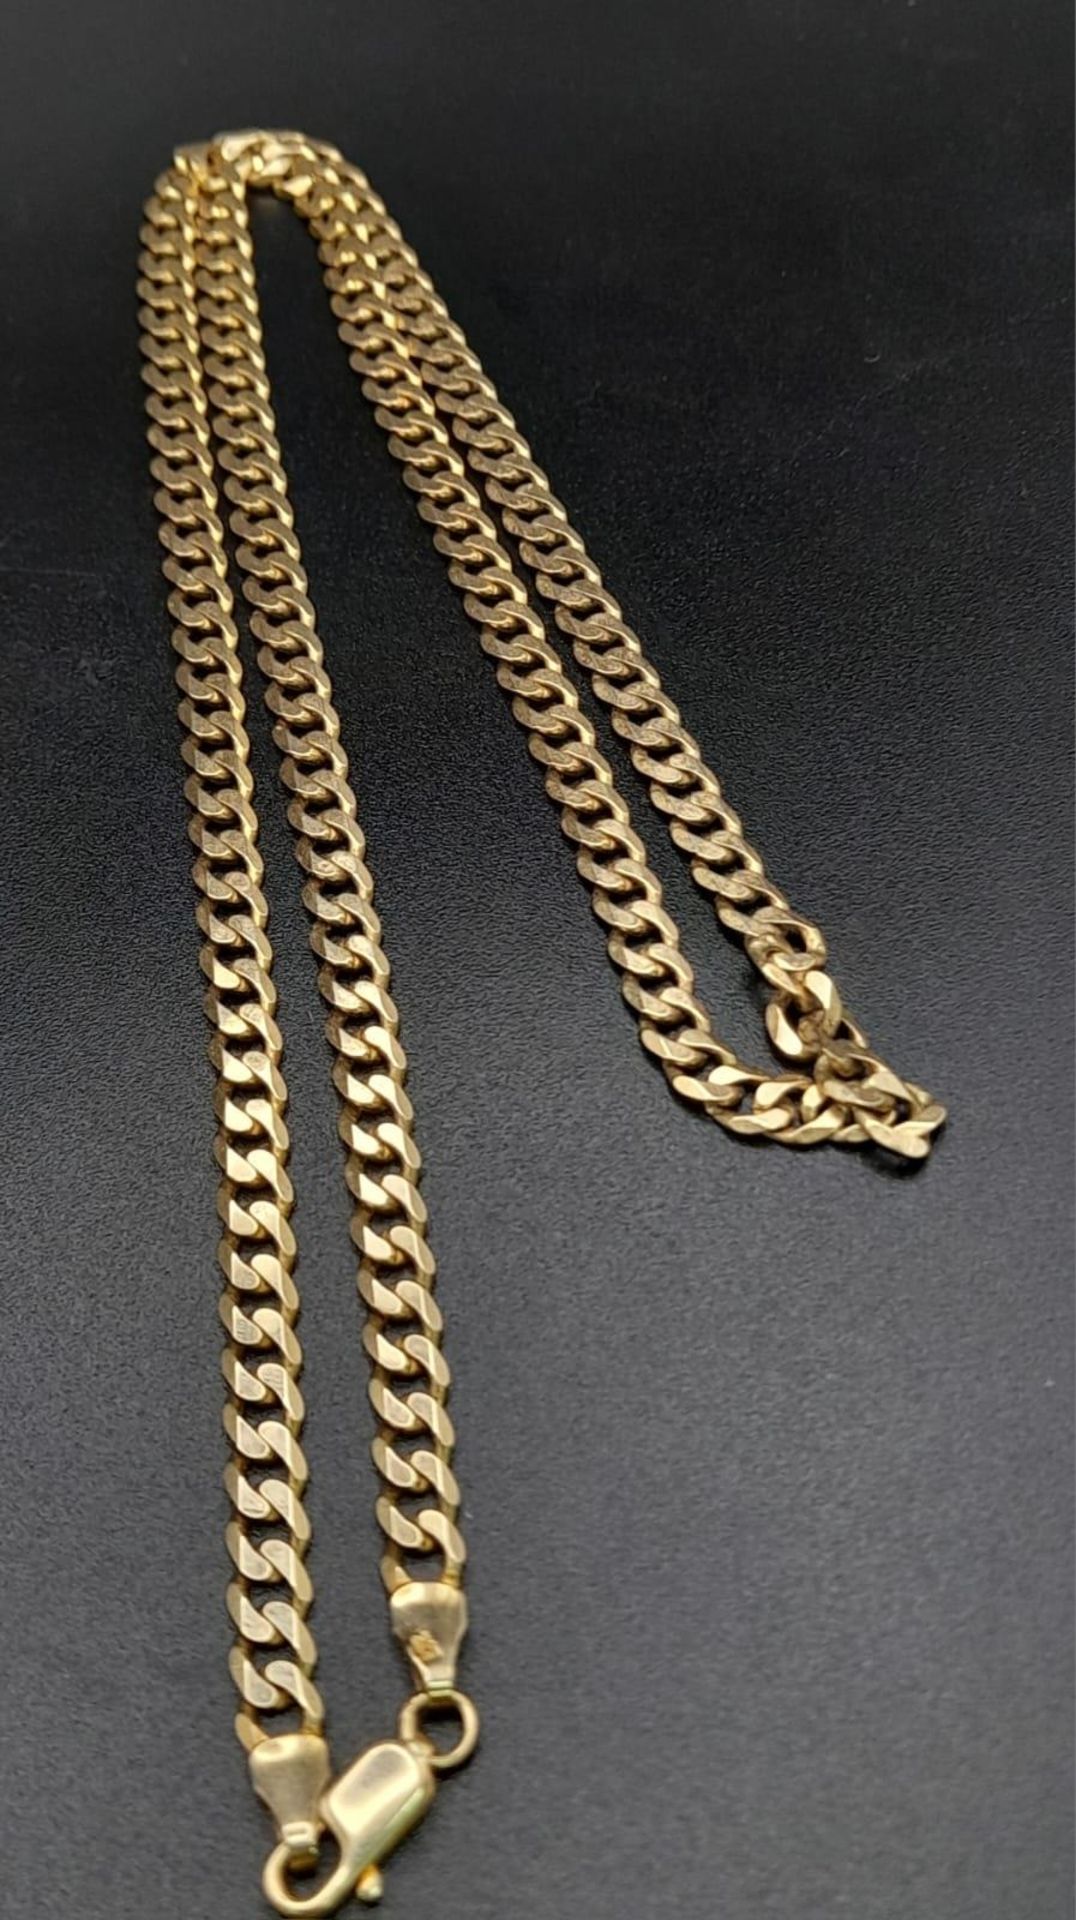 A 48cms 9K GOLD MIAMI CUBAN LINK CHAIN ..16gms - Image 2 of 4